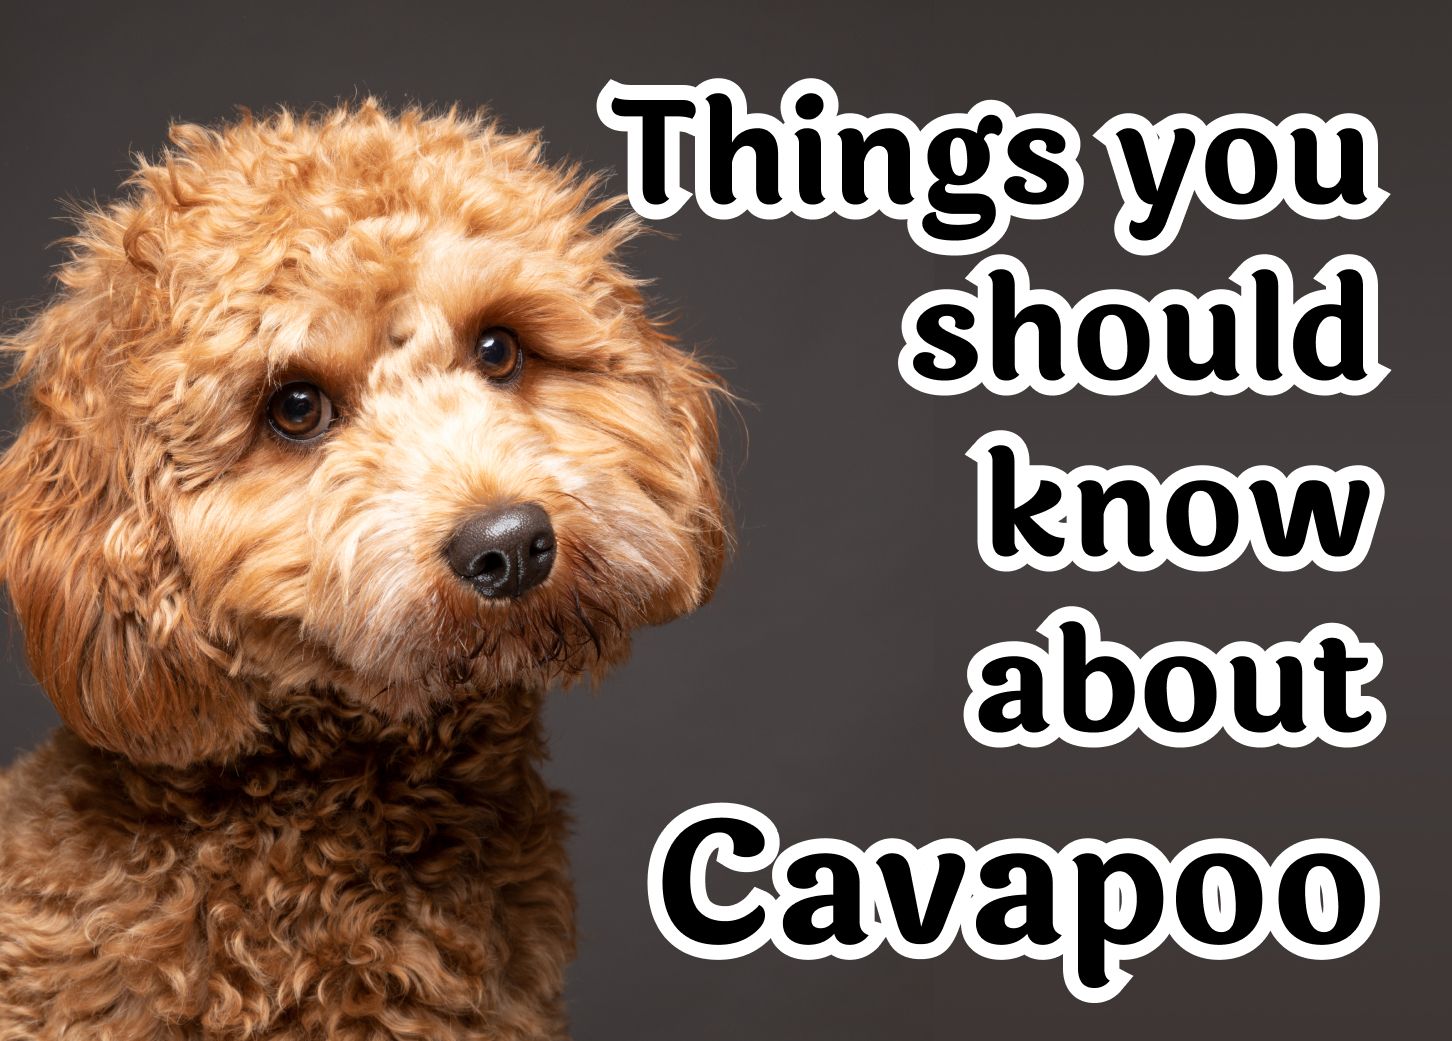 Frequently Asked Questions About the Cavapoo Breed